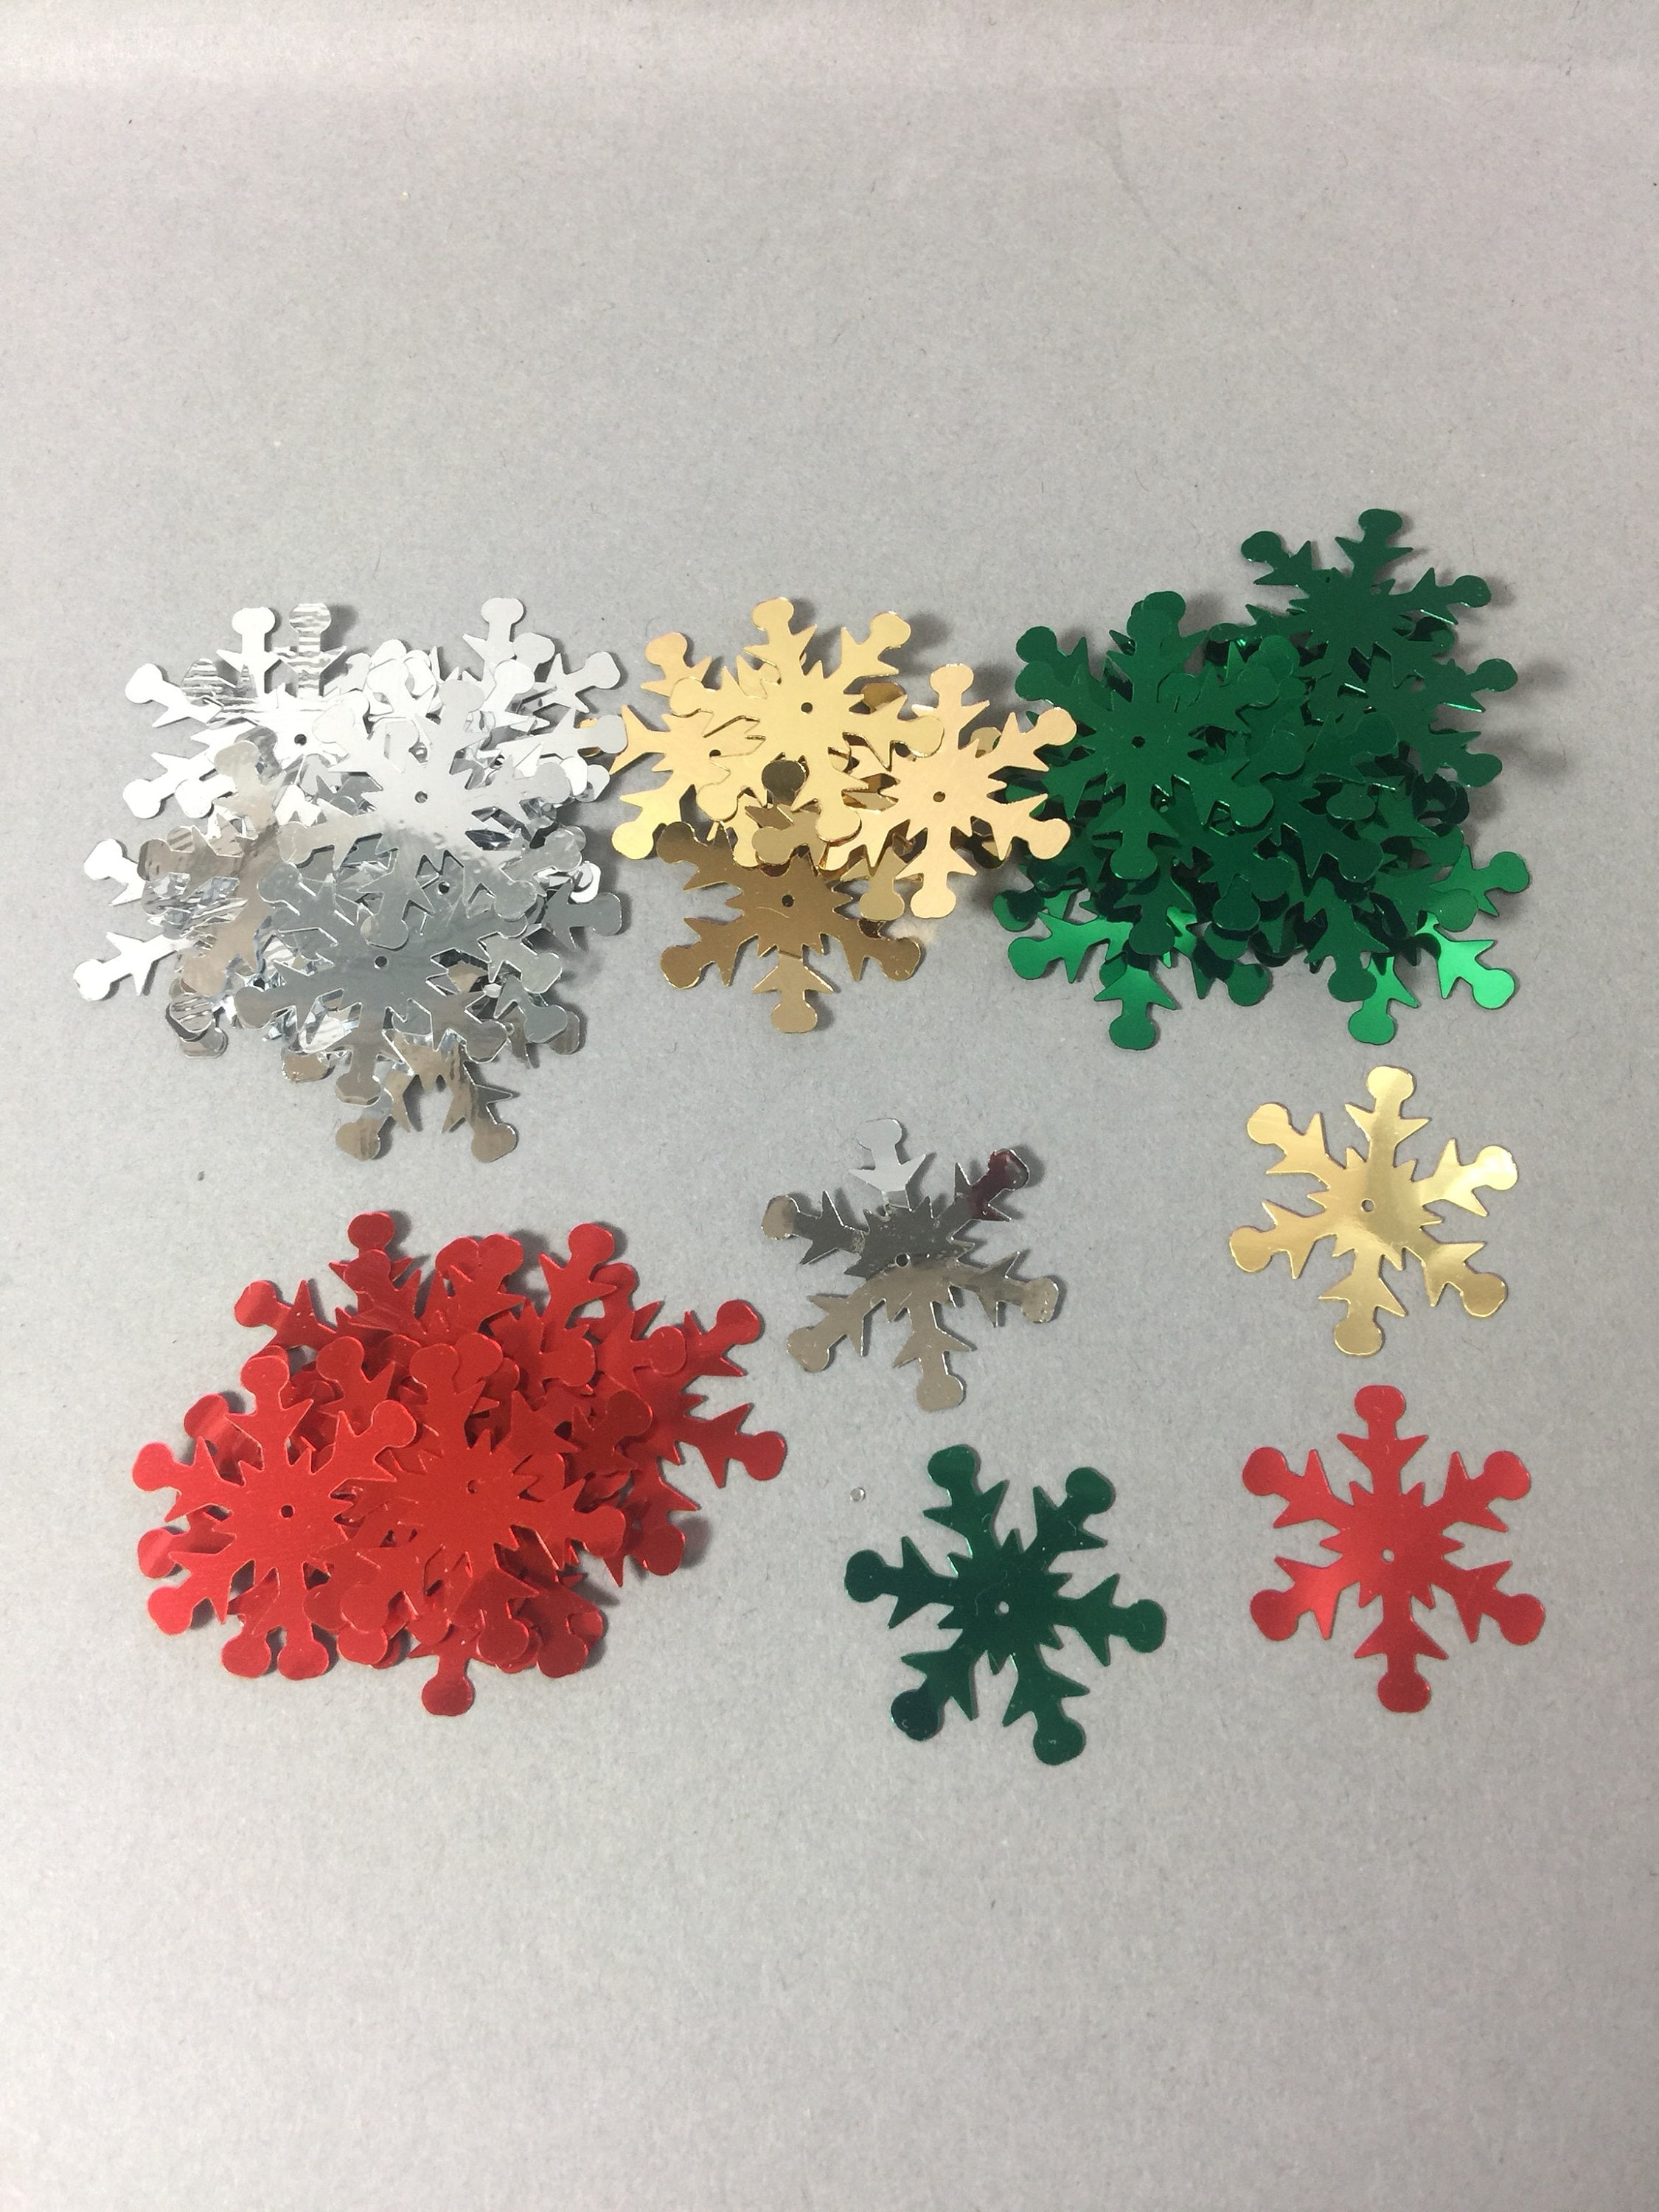 Christmas Shapes Sequins Mixed Pack 20g 100s of Sequins. Holly, Stars,  Snowflakes, Christmas Trees Etc. Festive Crafts. 